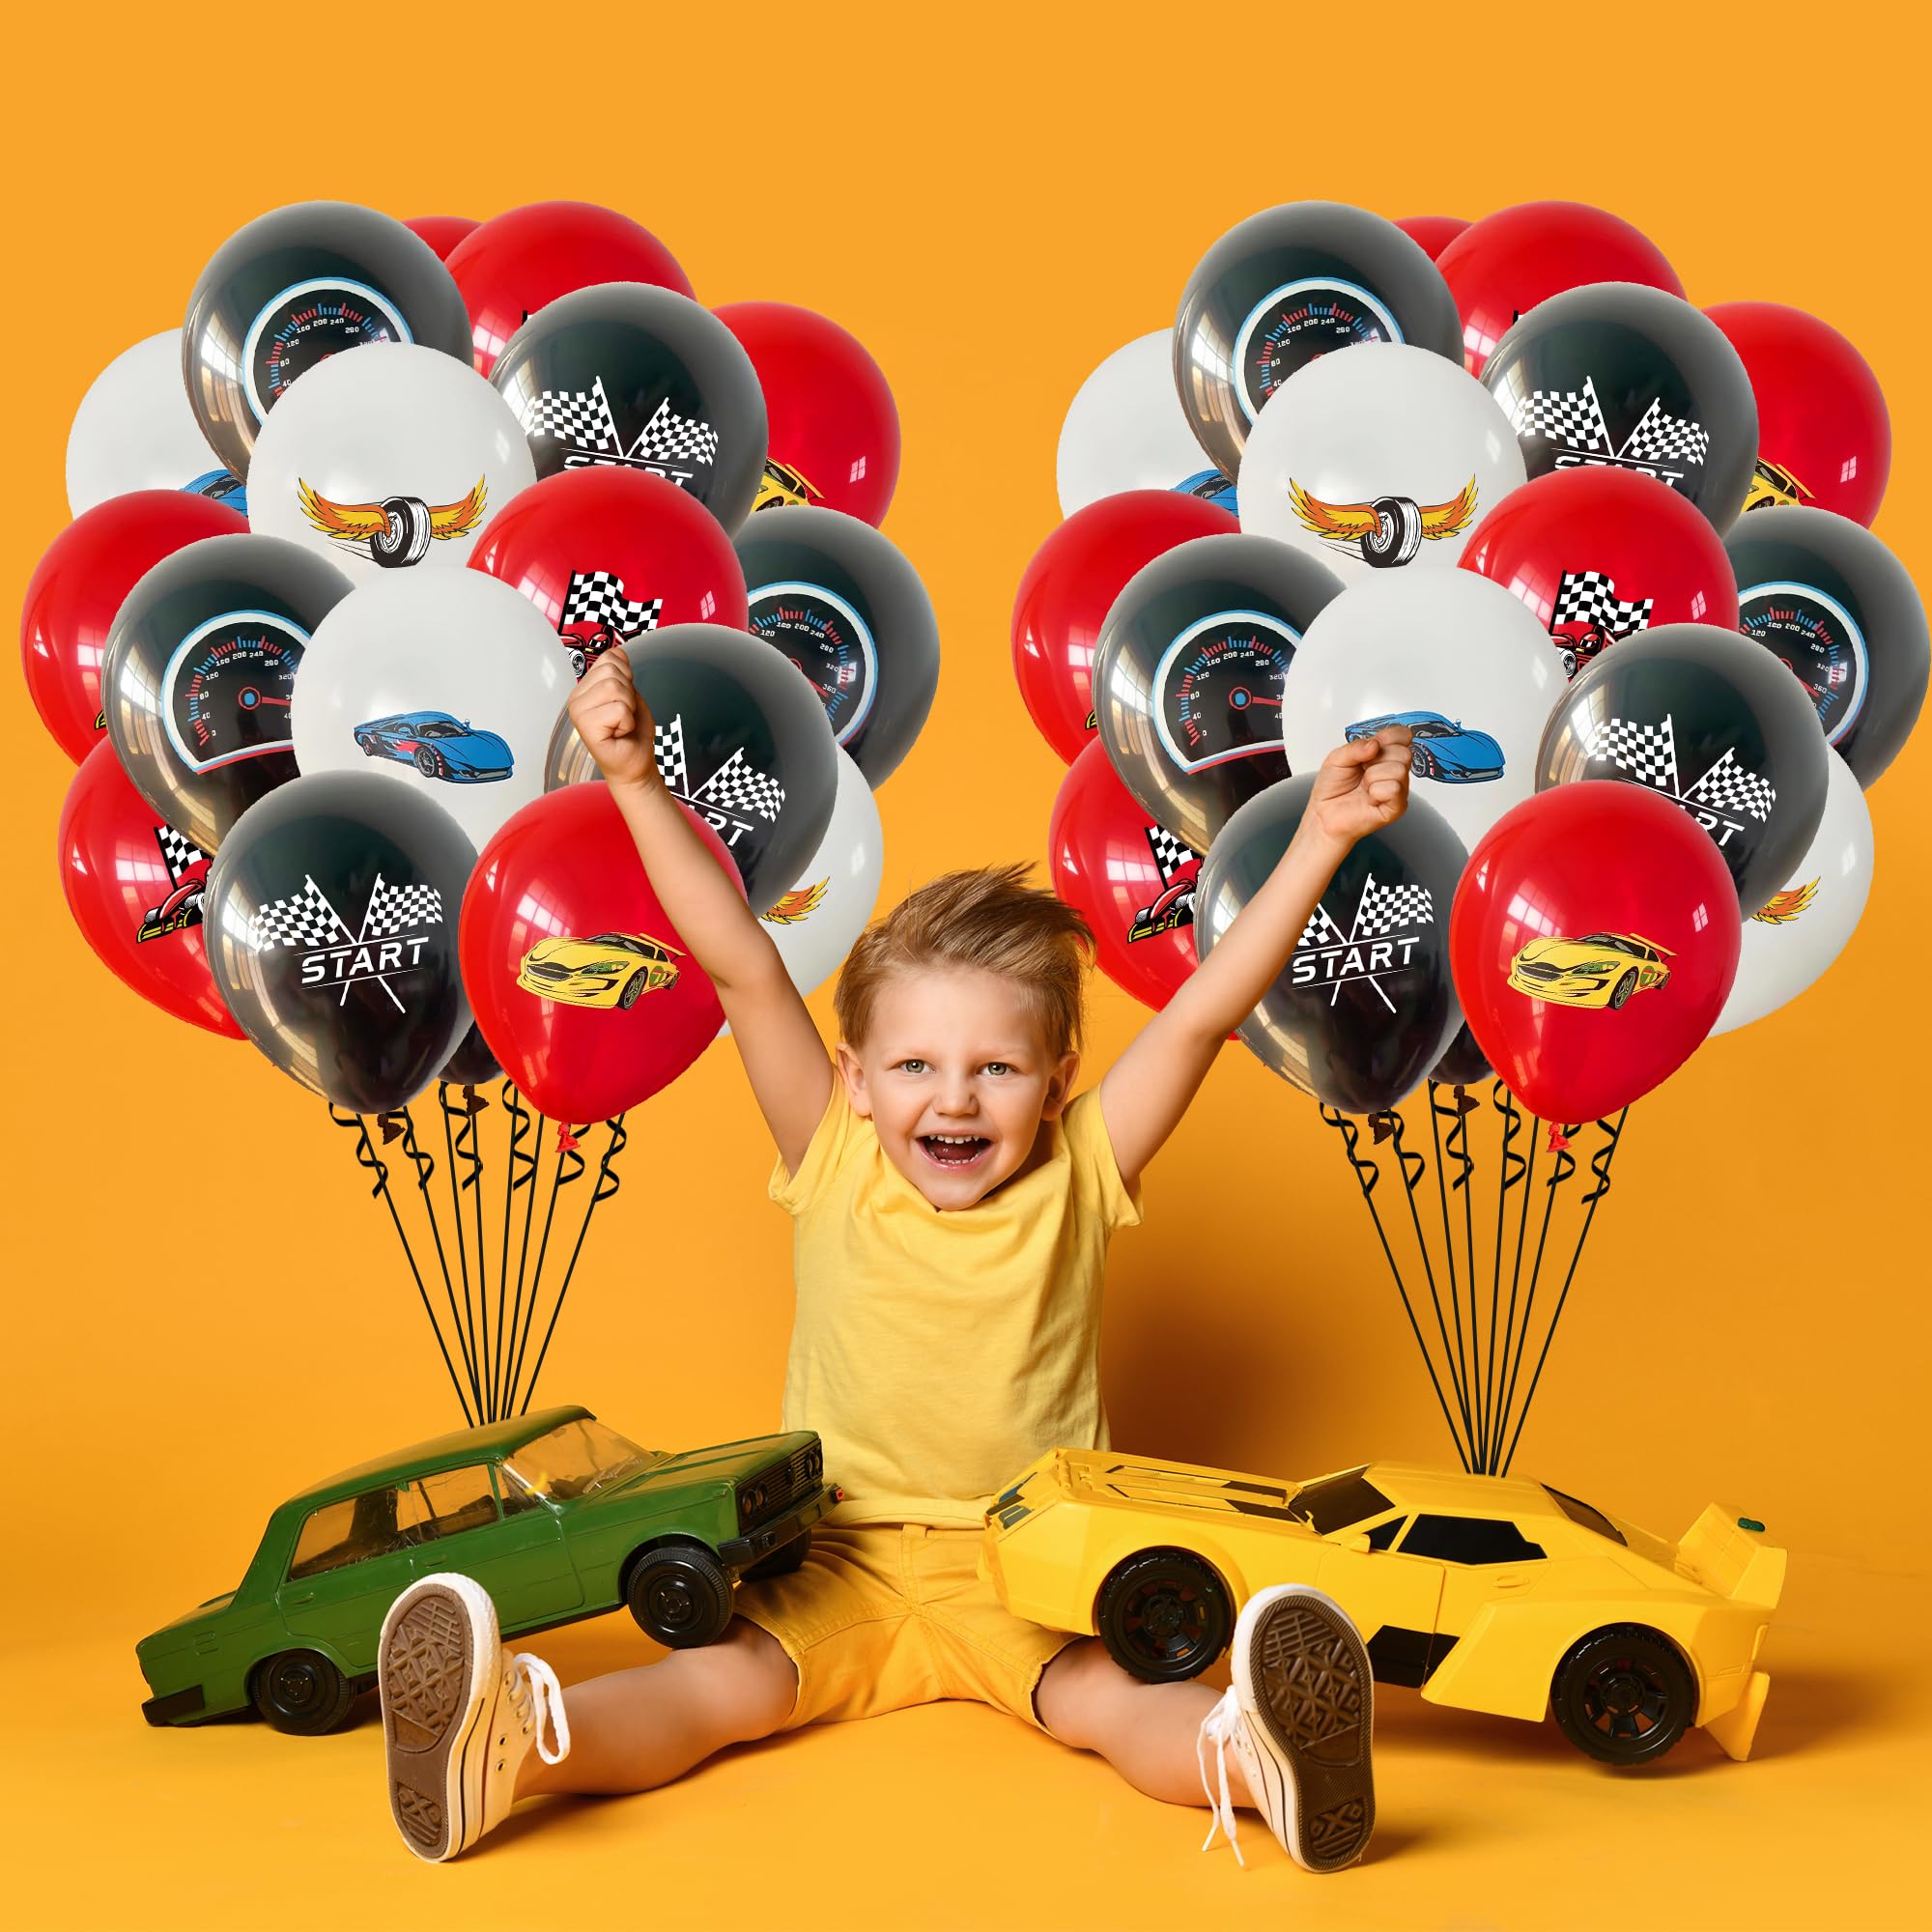 Racing Car Birthday Decorations Balloons - 42pieces Race Car Birthday Latex Balloons for Kids Racing Themed Birthday Party Decoration Supplies